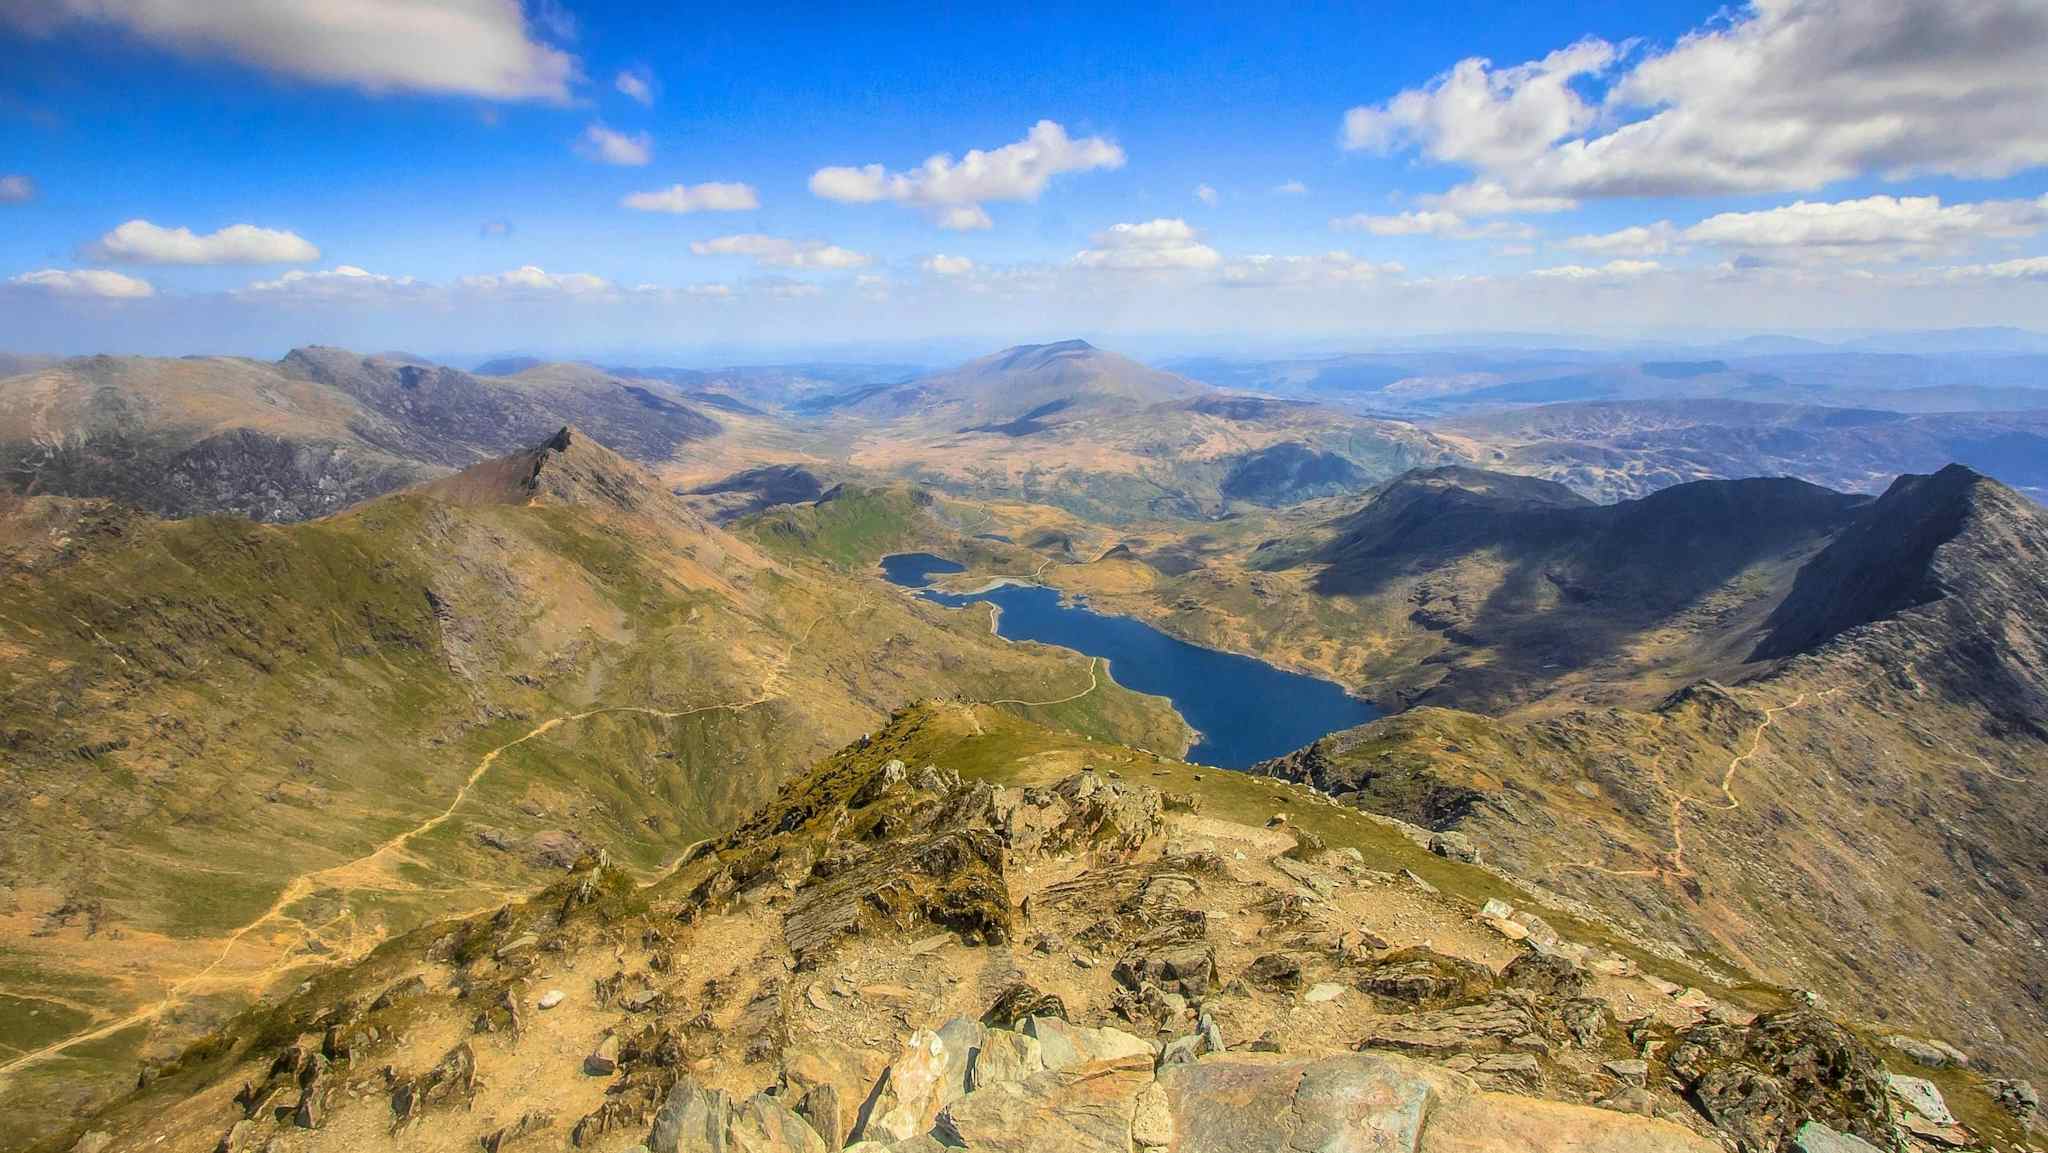 The panorama from the top of Snowdon